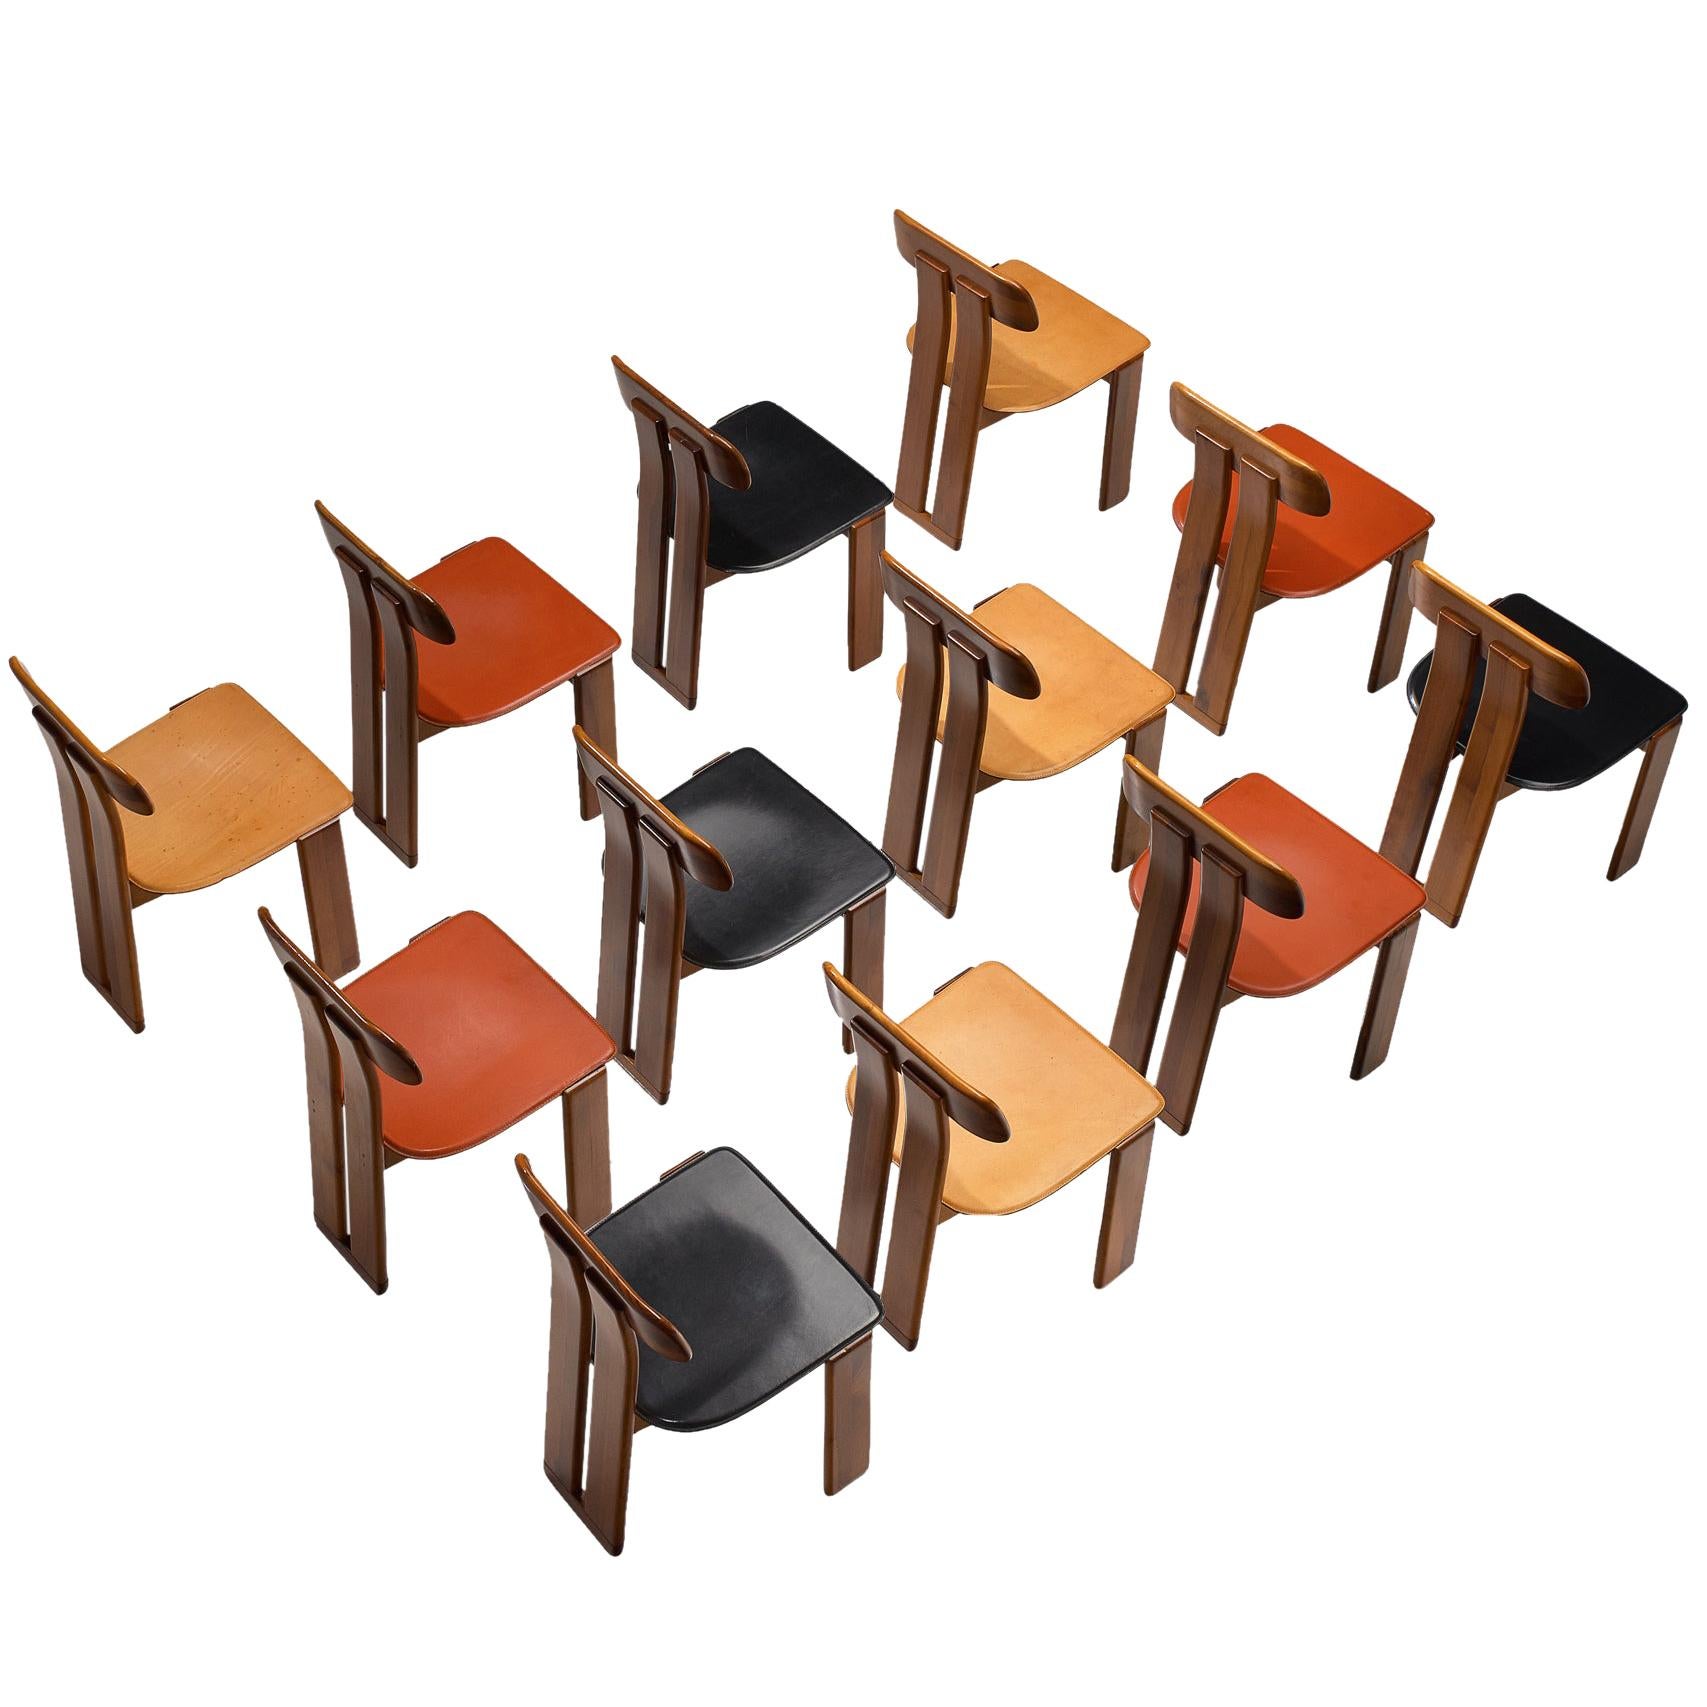 Italian Set of Twelve Dining Chairs by Sapporo in Mixed Colored Seats